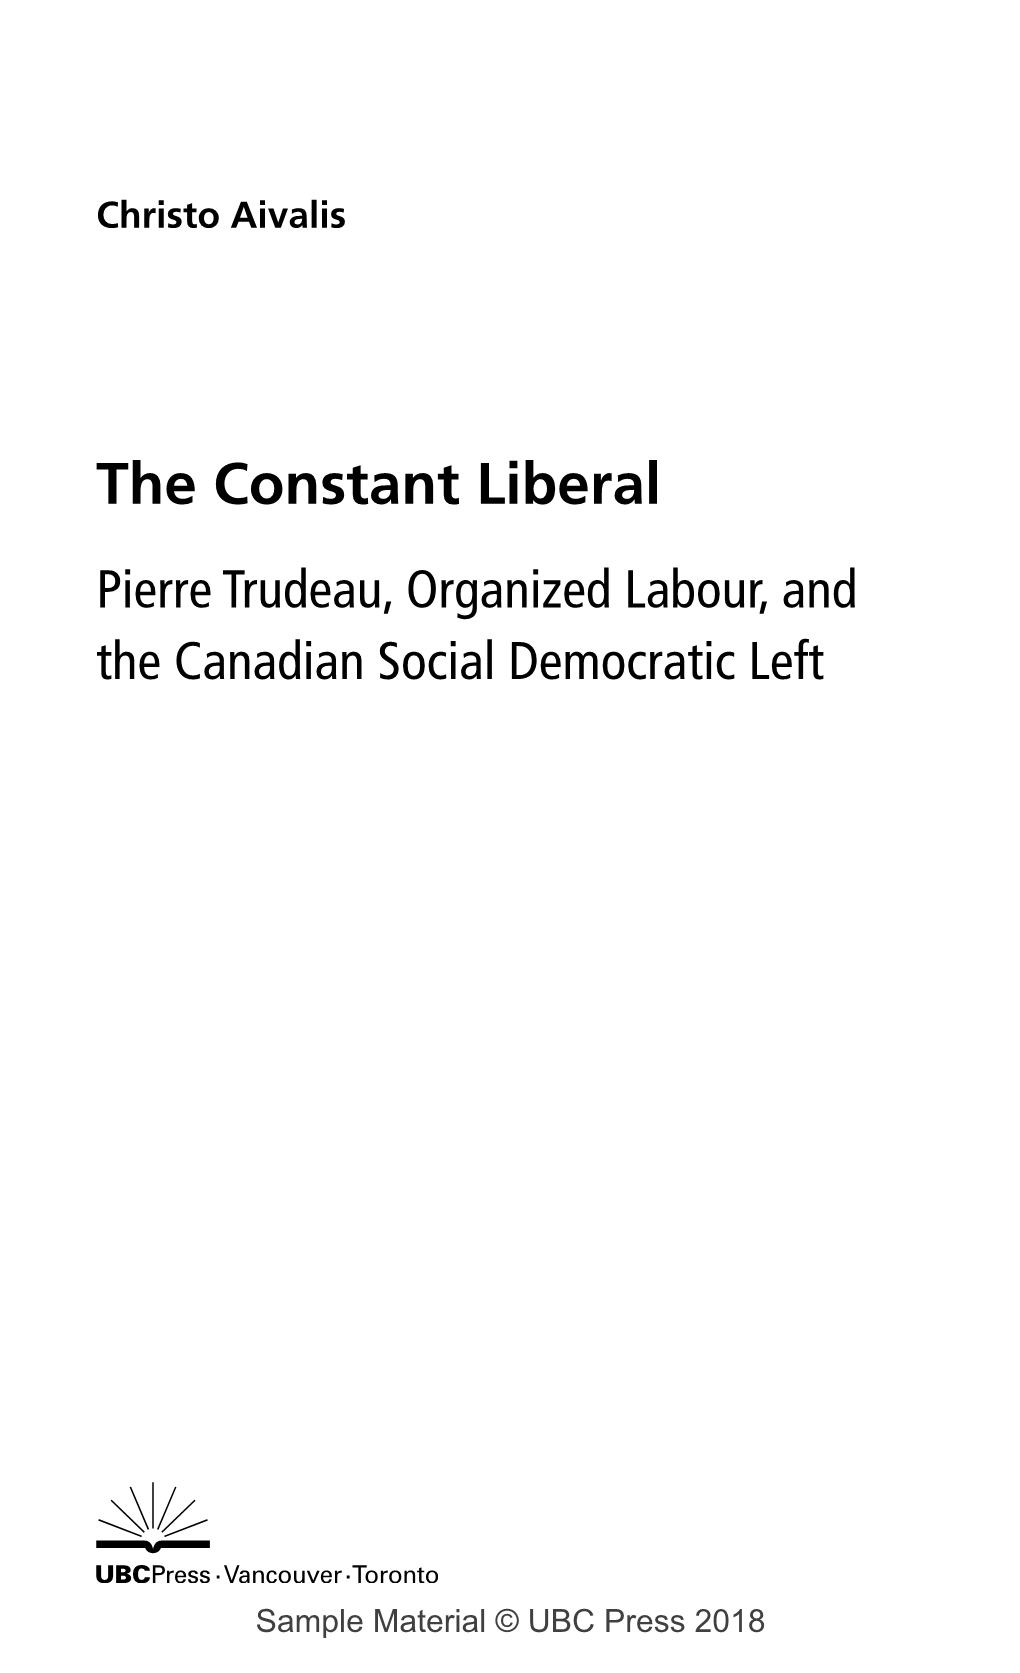 The Constant Liberal: Pierre Trudeau, Organized Labour, and The